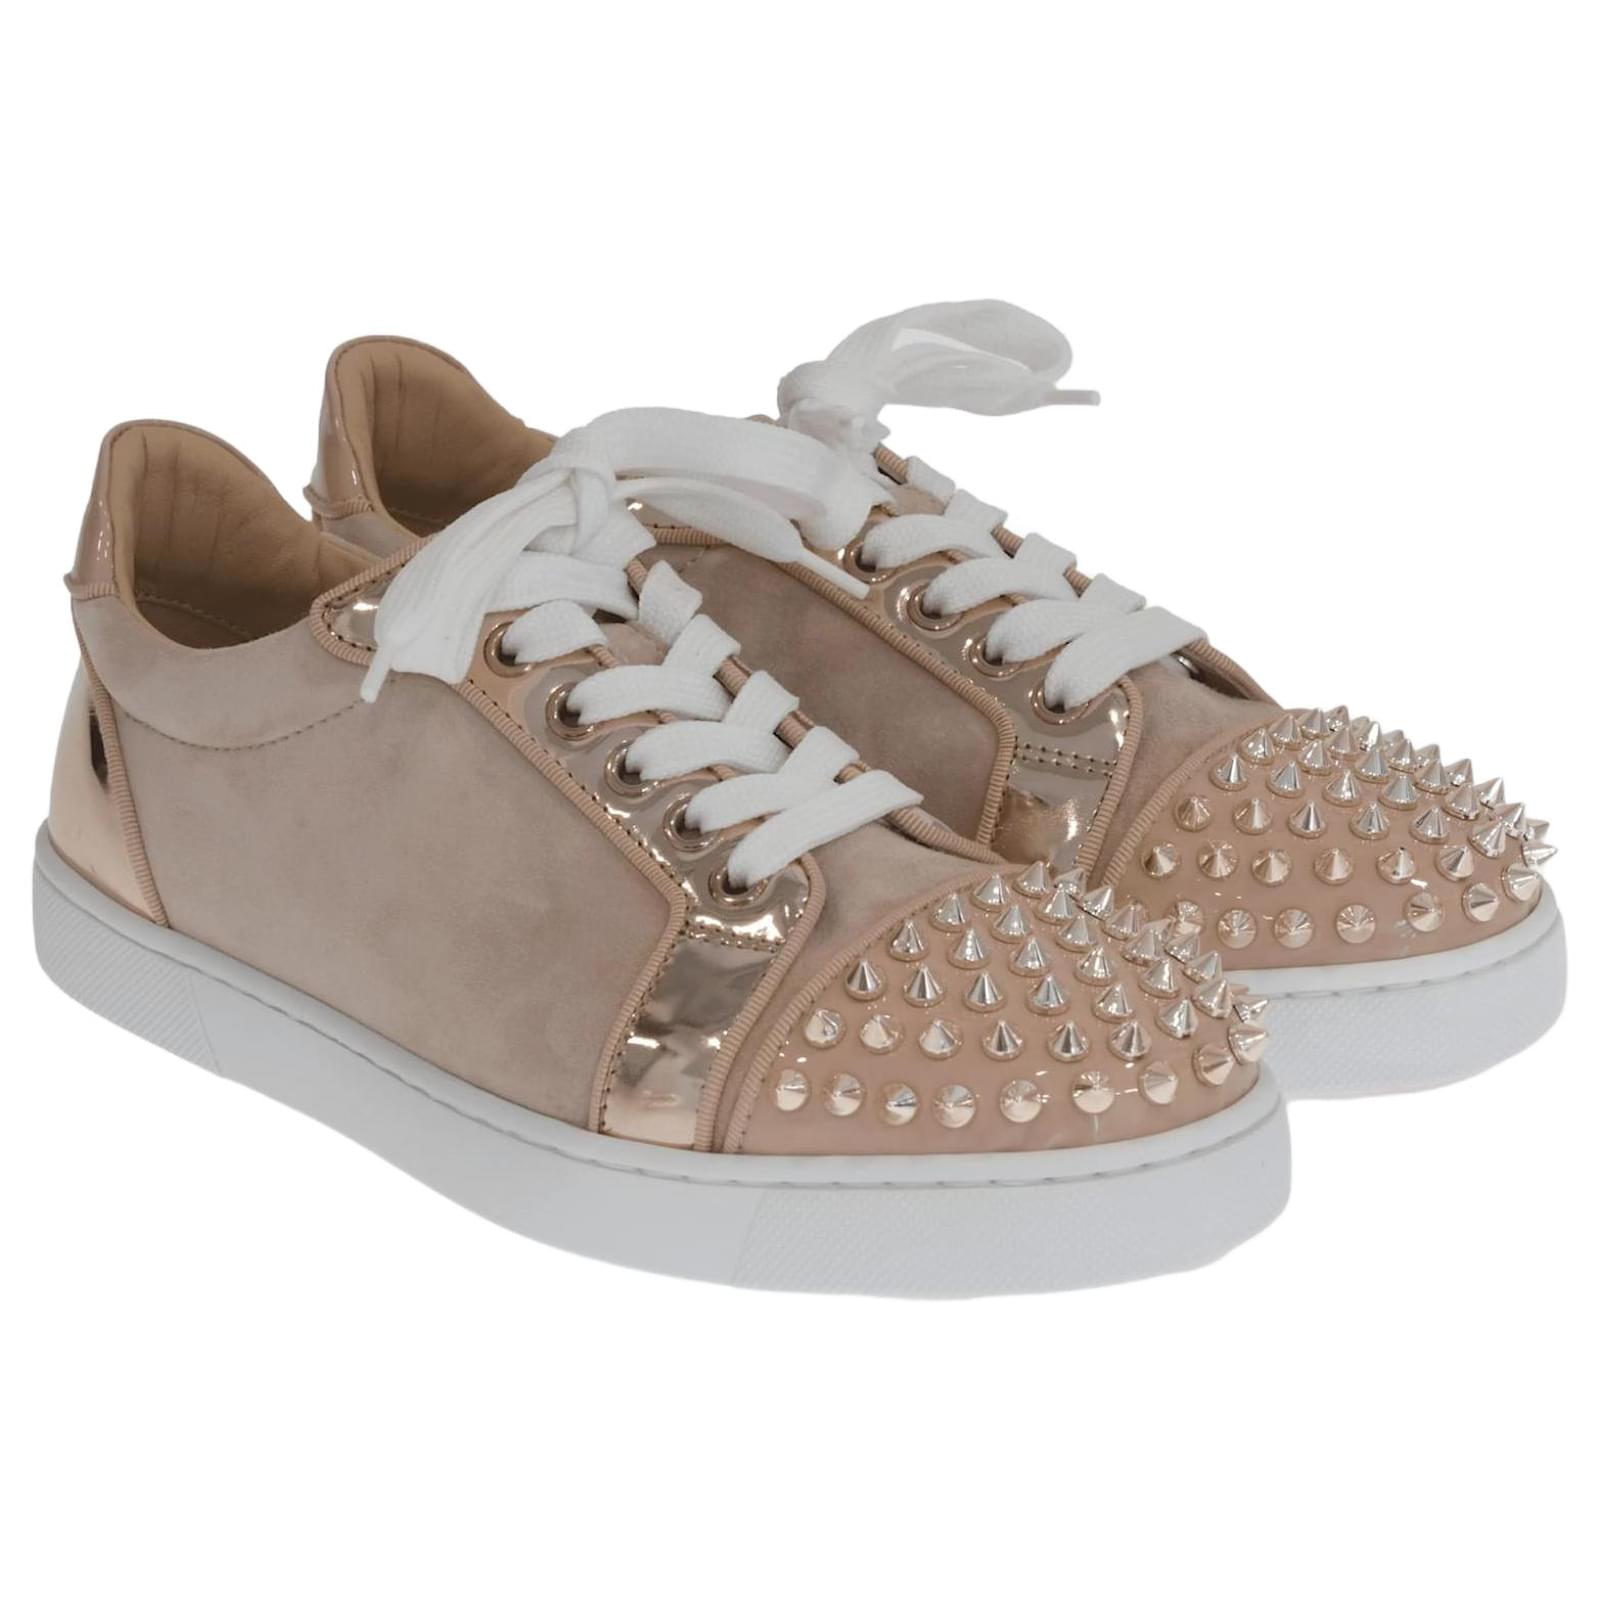 Christian Louboutin Beige Leather Louis Spike High Top Sneakers Size 39.5 Christian  Louboutin